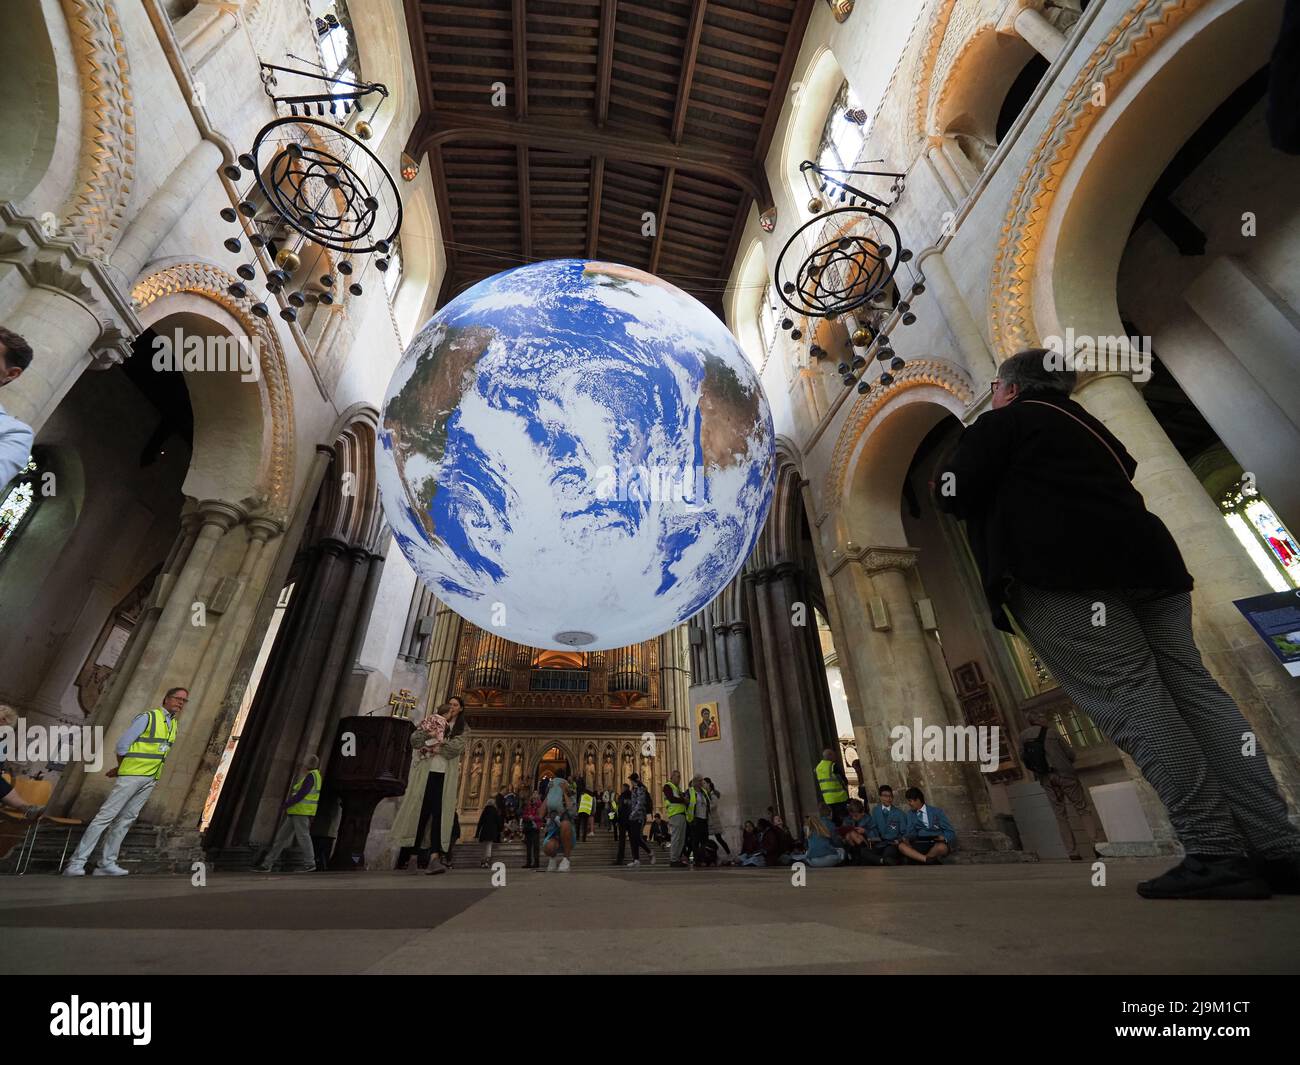 Rochester, Kent, UK. 24th May, 2022. Luke Jerram's 'Gaia' artwork -  a detailed replica of planet Earth - has been installed inside Rochester Cathedral in Kent. It opened to the public today and is on display until June 12. Credit: James Bell/Alamy Live News Stock Photo